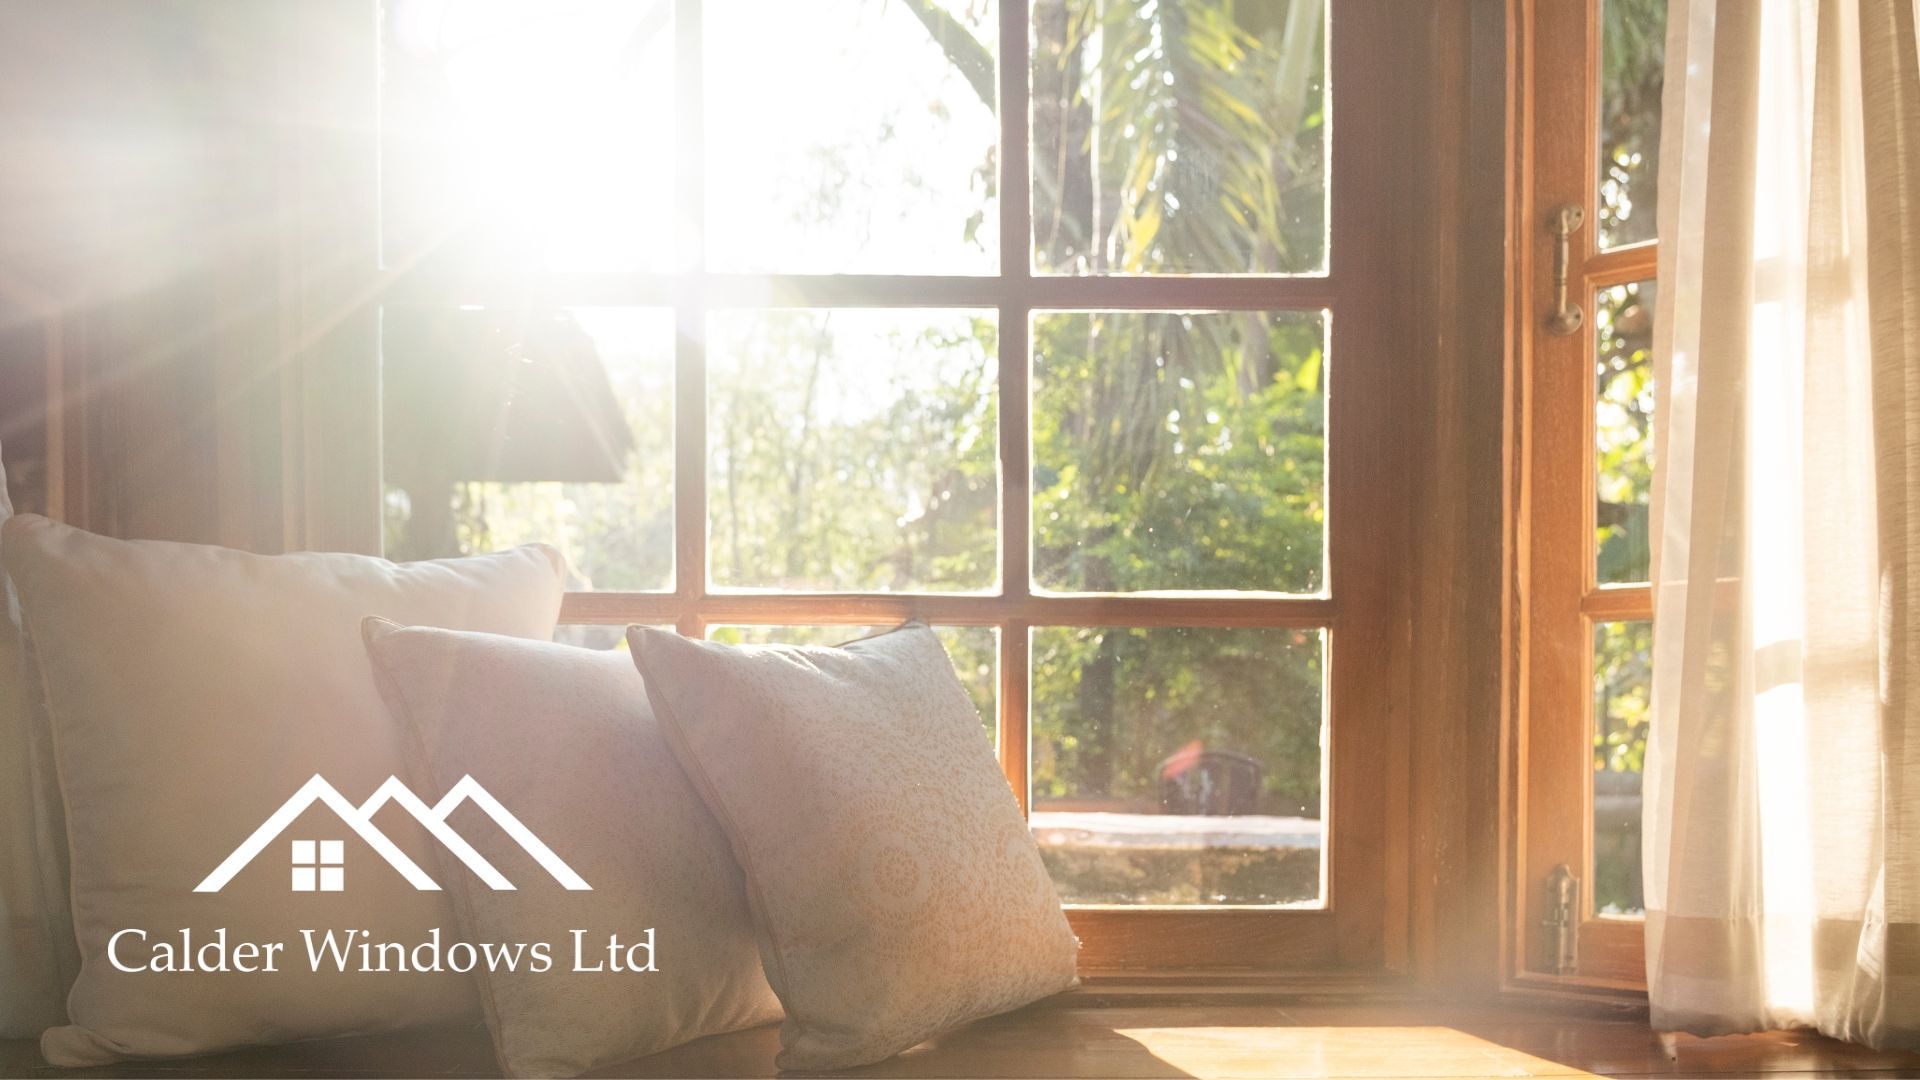 Get creative and decorate your bay window. Here are some unique design ideas to get you started.
